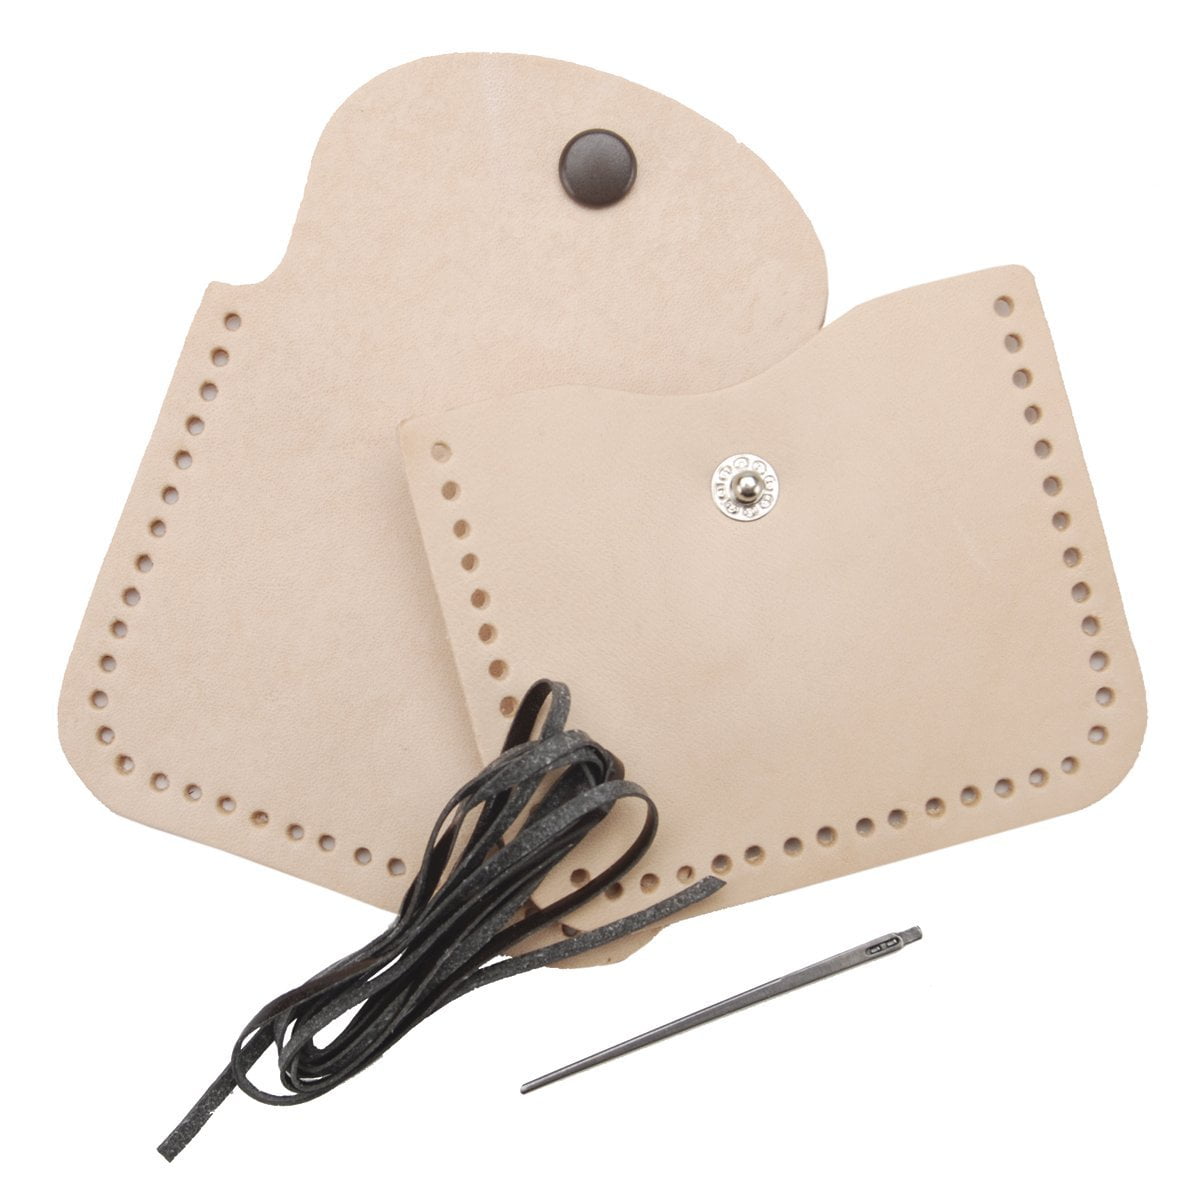 Tandy Leather - Small Change Coin Purse Kit 4107-00, Lace and pattern included By Tandy Leather ...